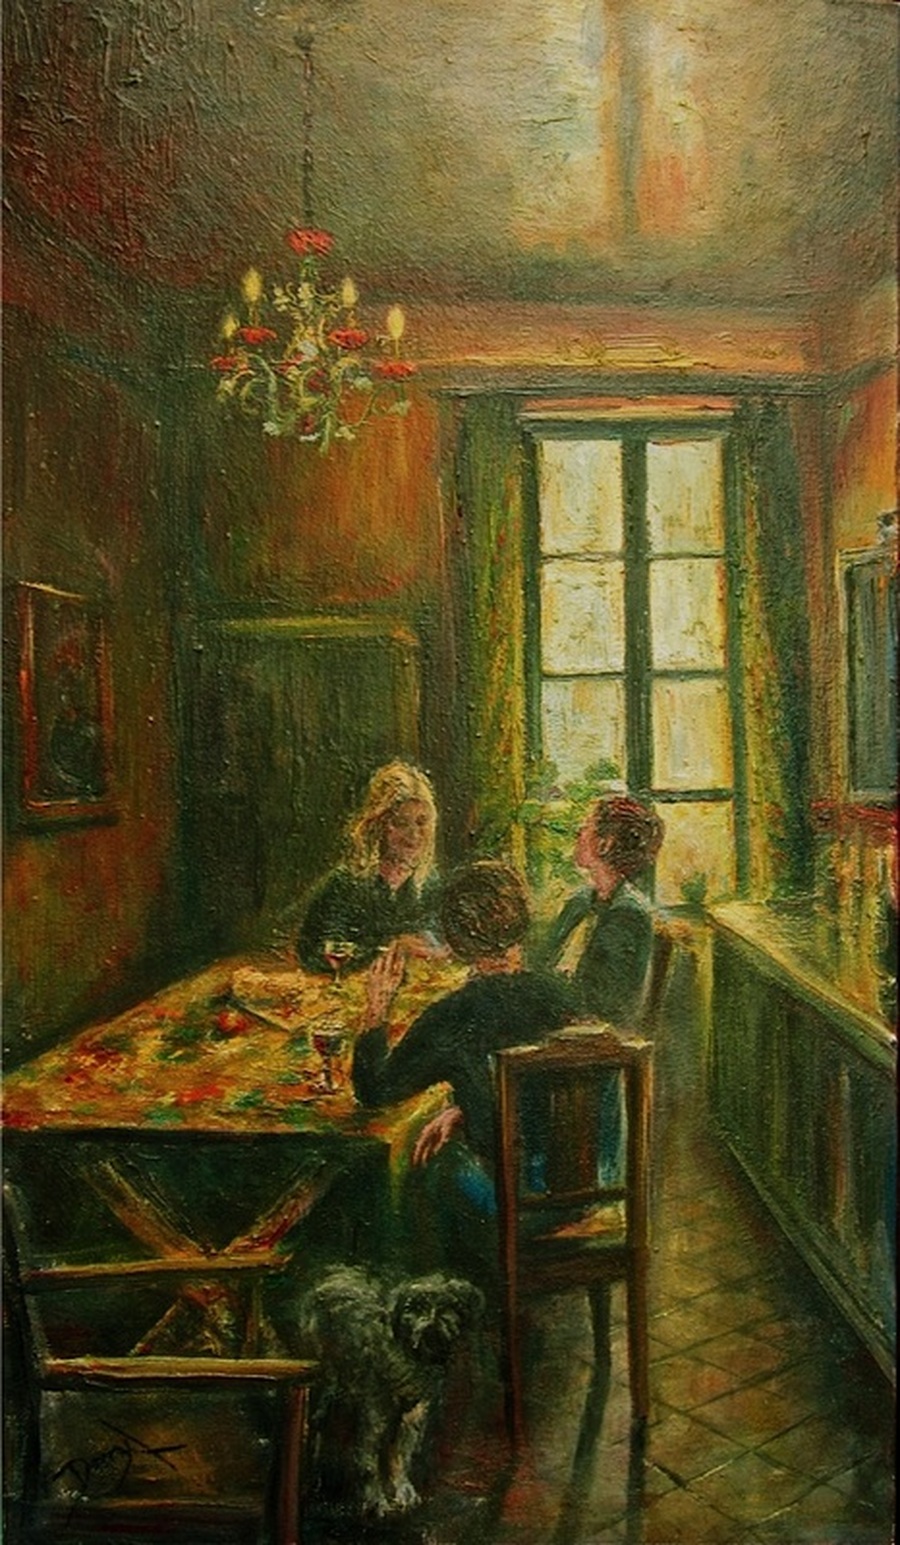 French Provencal kitchen painting : 'Amanda's Kitchen' Oils on canvas. An interior of 18th century kitchen. The walls are a dark red with green bench and food larder. It is a small room, enough for food preparation and aspace for a country style table with provencal style table cloth. Sitting around the table are three young women in conversation sharing wine and bread. There is a small dog watching the artist (myself as I made some quick sketches). There is a soft light through the window giving a golden glow to the painting. An ornate old chandelier hangs from the ceiling.